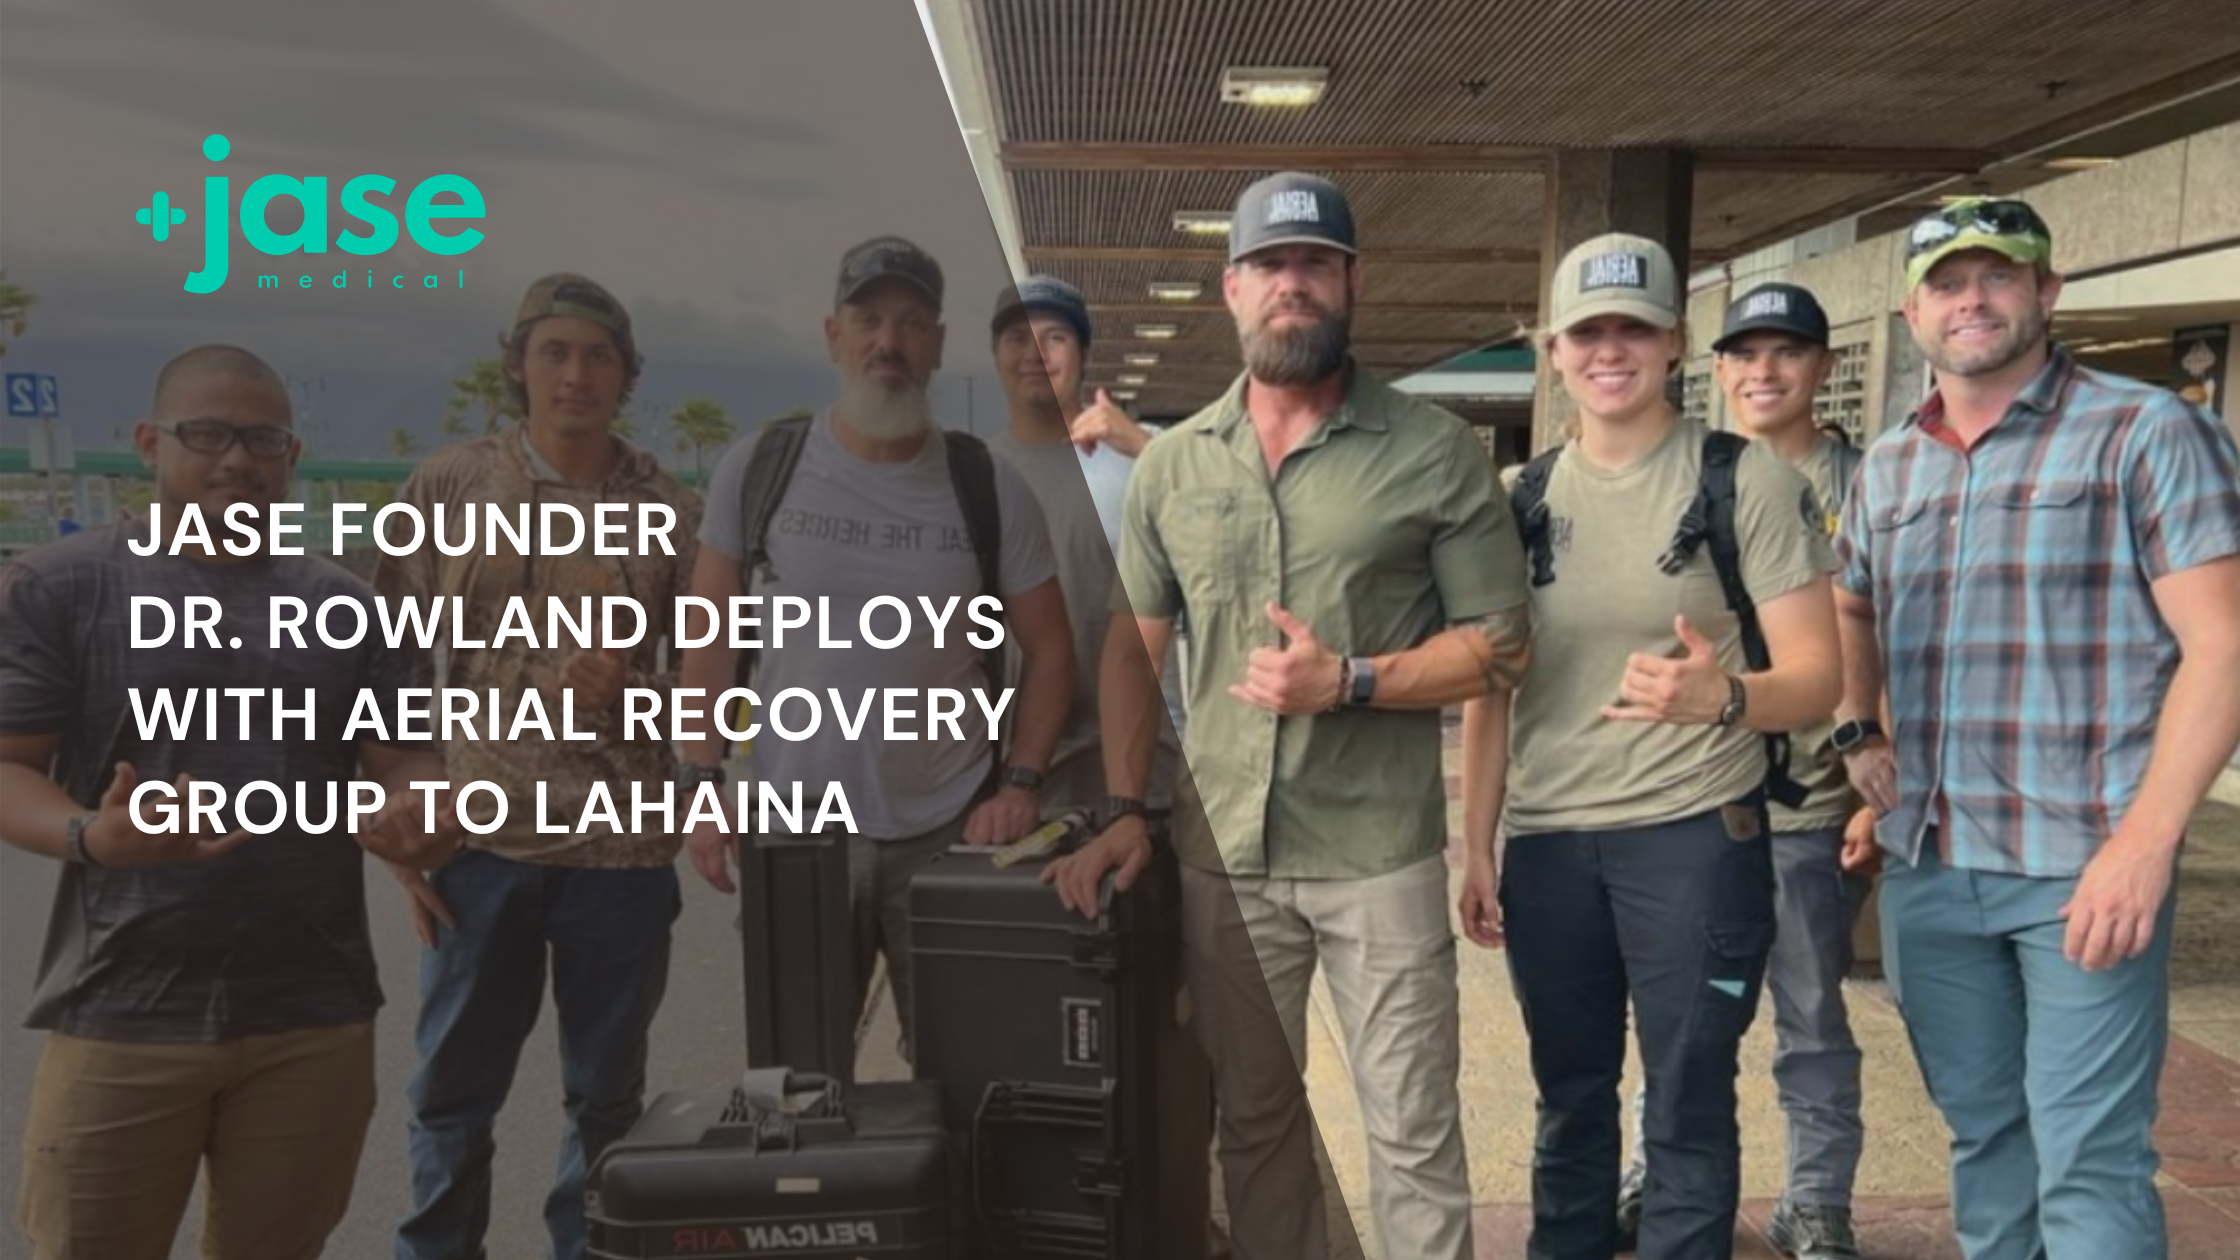 Jase Founder Dr. Rowland Deploys with Aerial Recovery Group to Lahaina